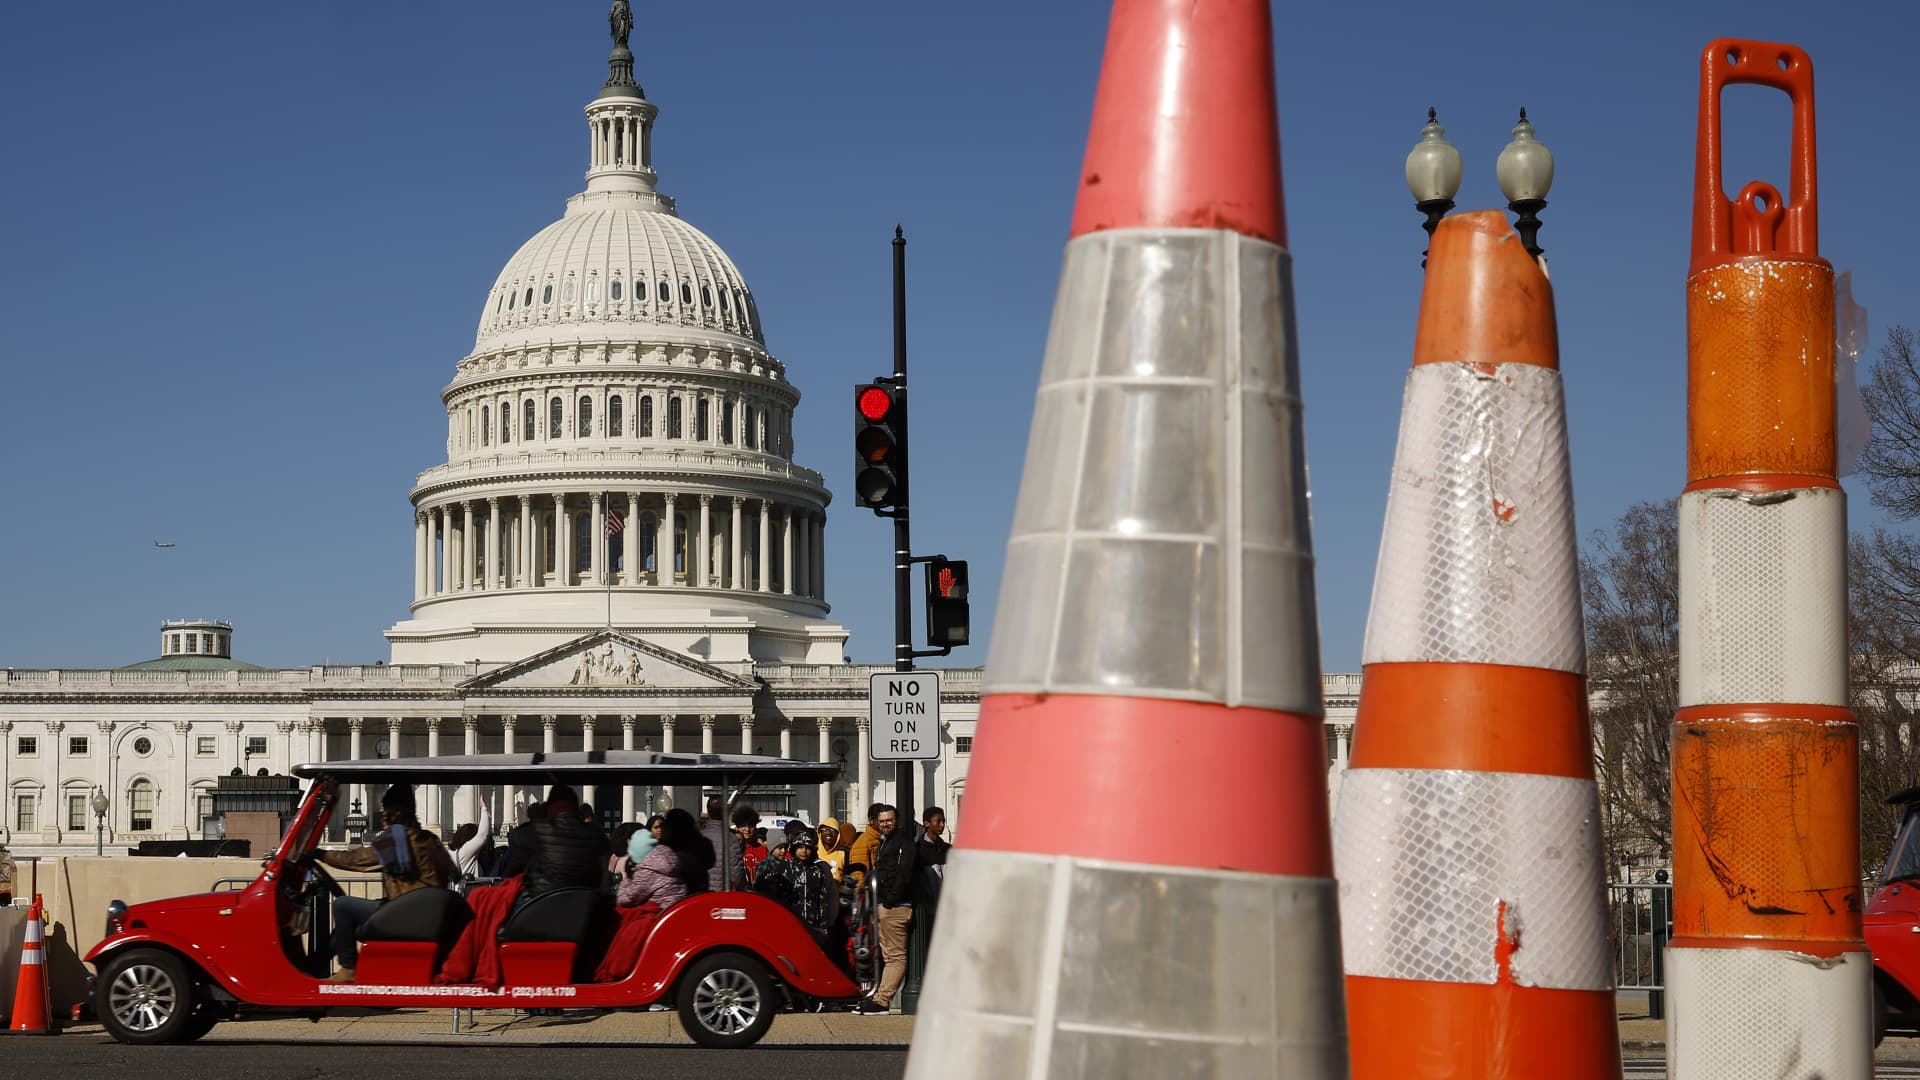 WASHINGTON, DC - MARCH 20: Tourists travel along 1st Street near the East Front of the U.S. Capitol building on March 20, 2023 in Washington, DC.